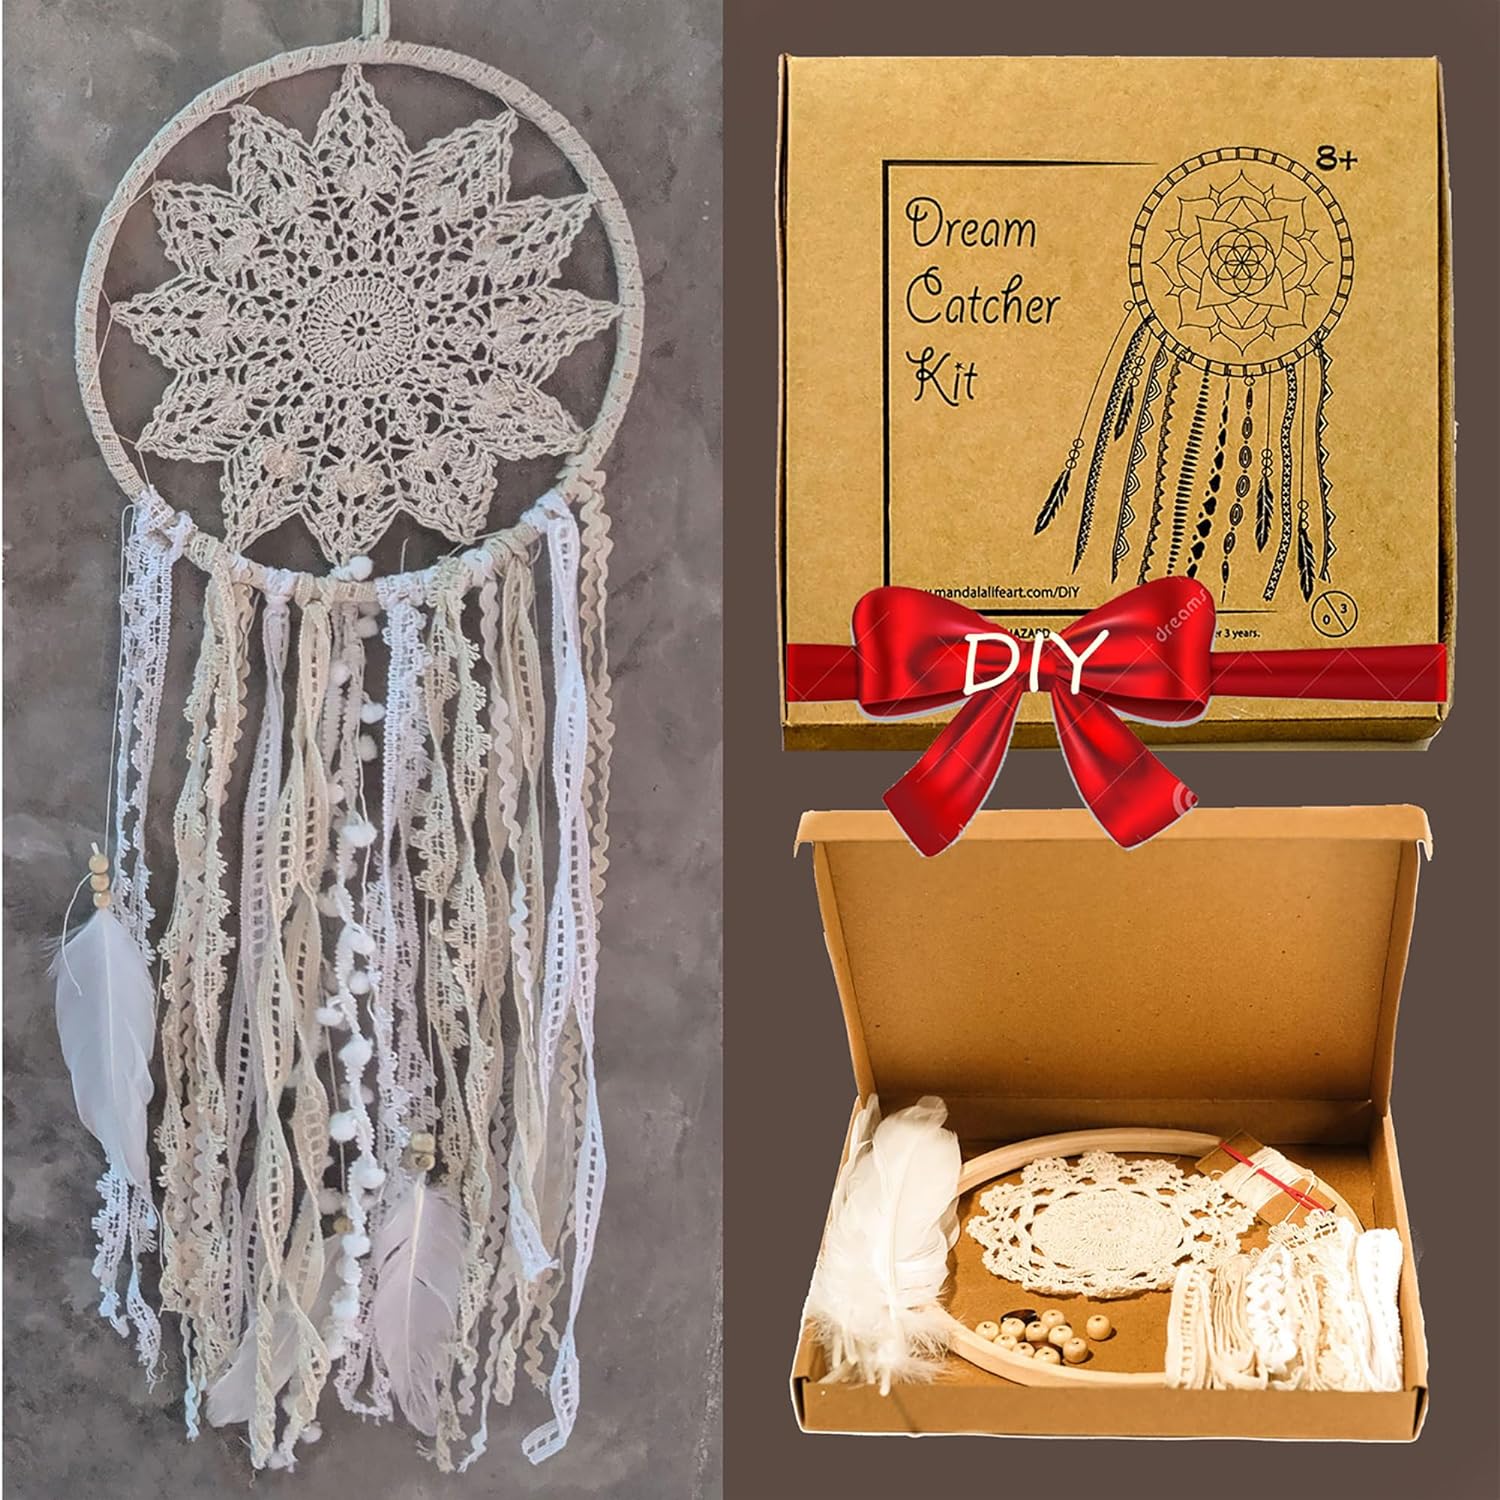 Mandala Life ART DIY Dreamcatcher Kit - Creative Activity Set 10x28 inches - Make Your Own Bohemian Wall Hanging with All-Natural Materials - Includes Premium Lace, Yarn, Feathers and Wooden Hoop